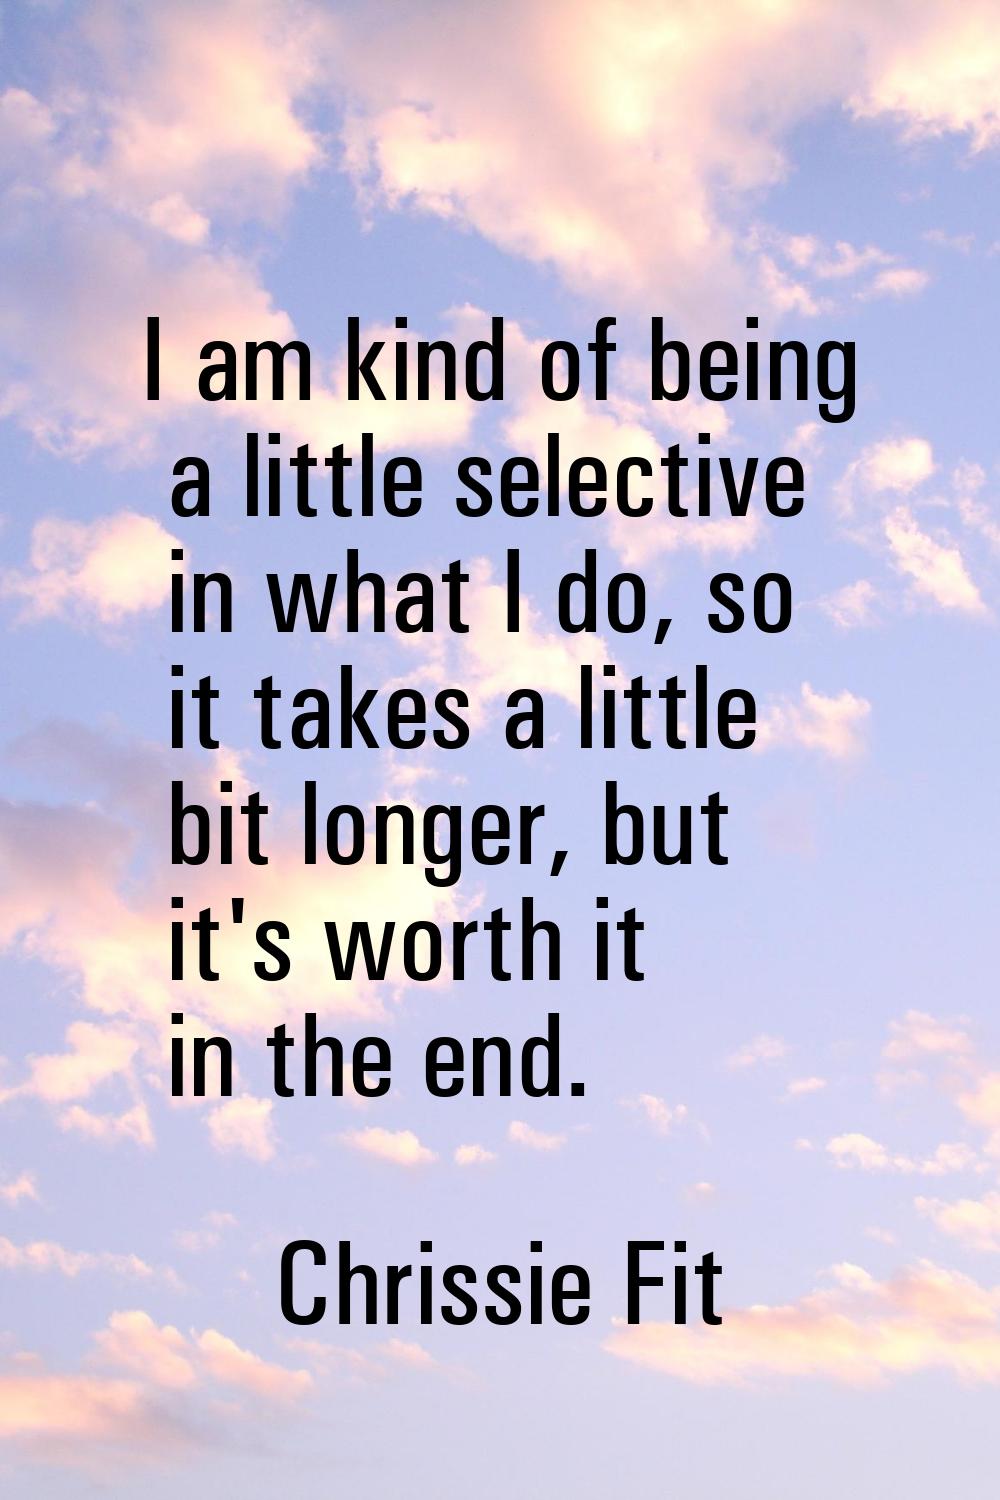 I am kind of being a little selective in what I do, so it takes a little bit longer, but it's worth